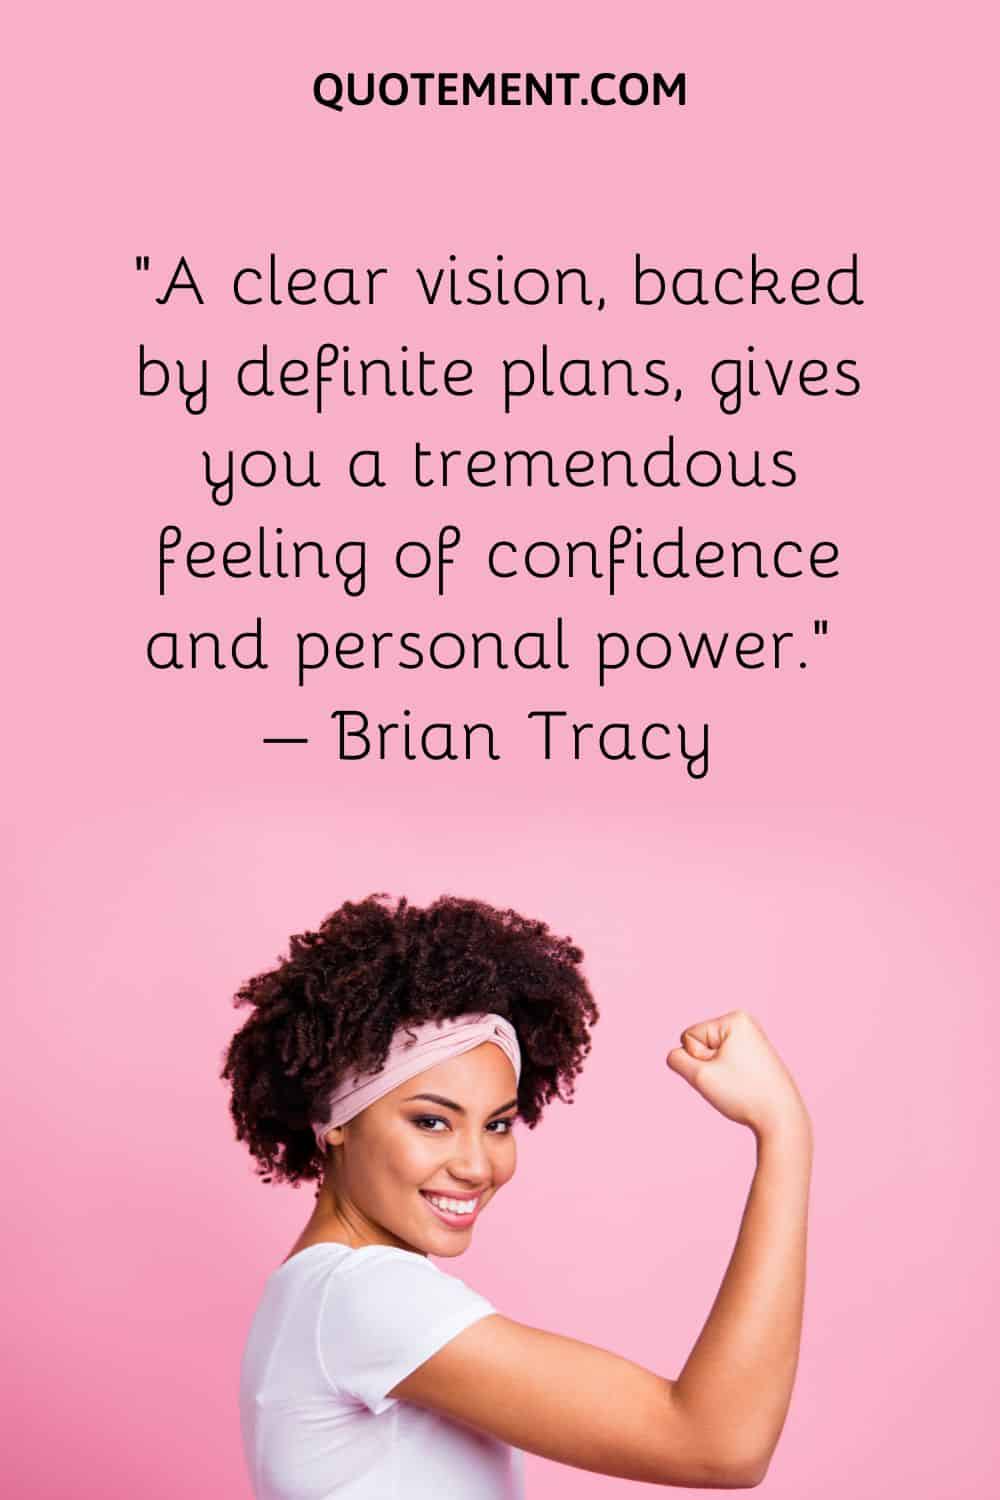 A clear vision, backed by definite plans, gives you a tremendous feeling of confidence and personal power.